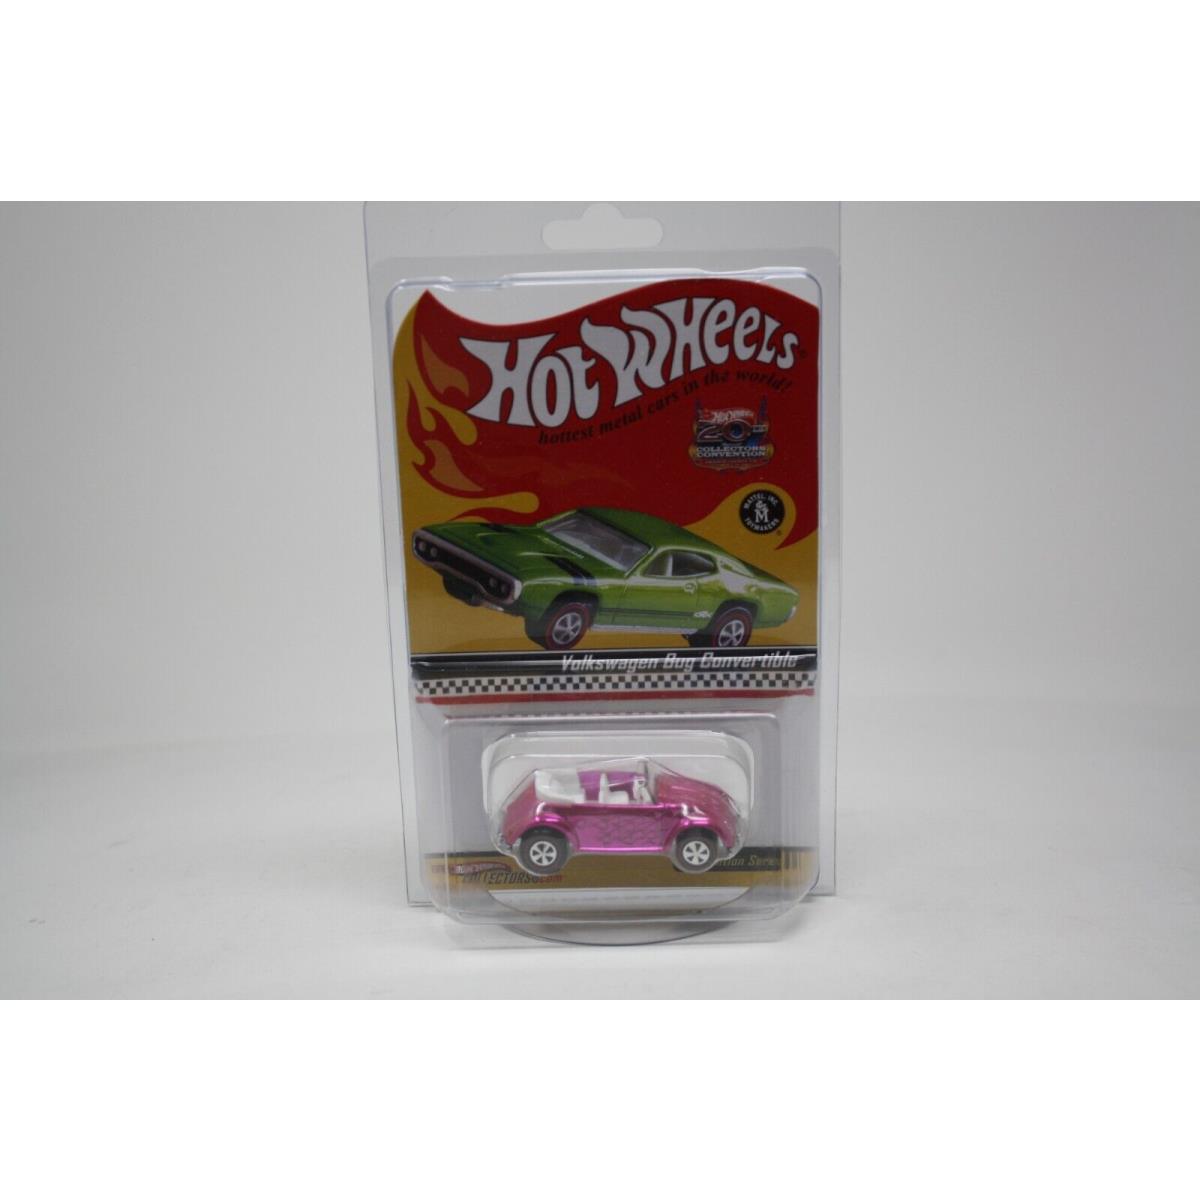 Hot Wheels 2006 20th Annual Convention VW Bug Convertible 9099/10000